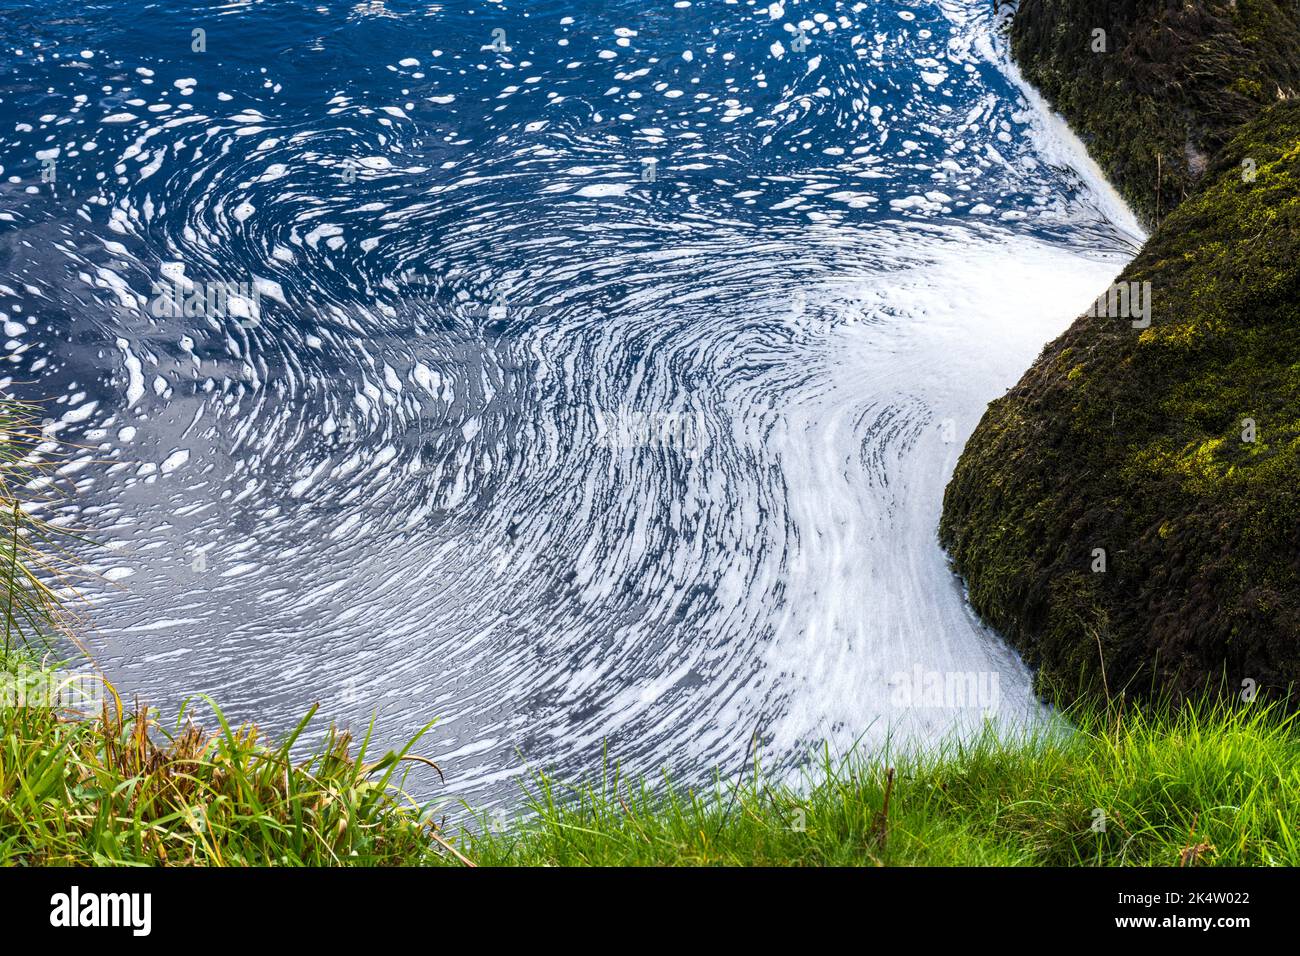 Water flowing in patterns on River Owenea, Glenties, County Donegal, Ireland Stock Photo